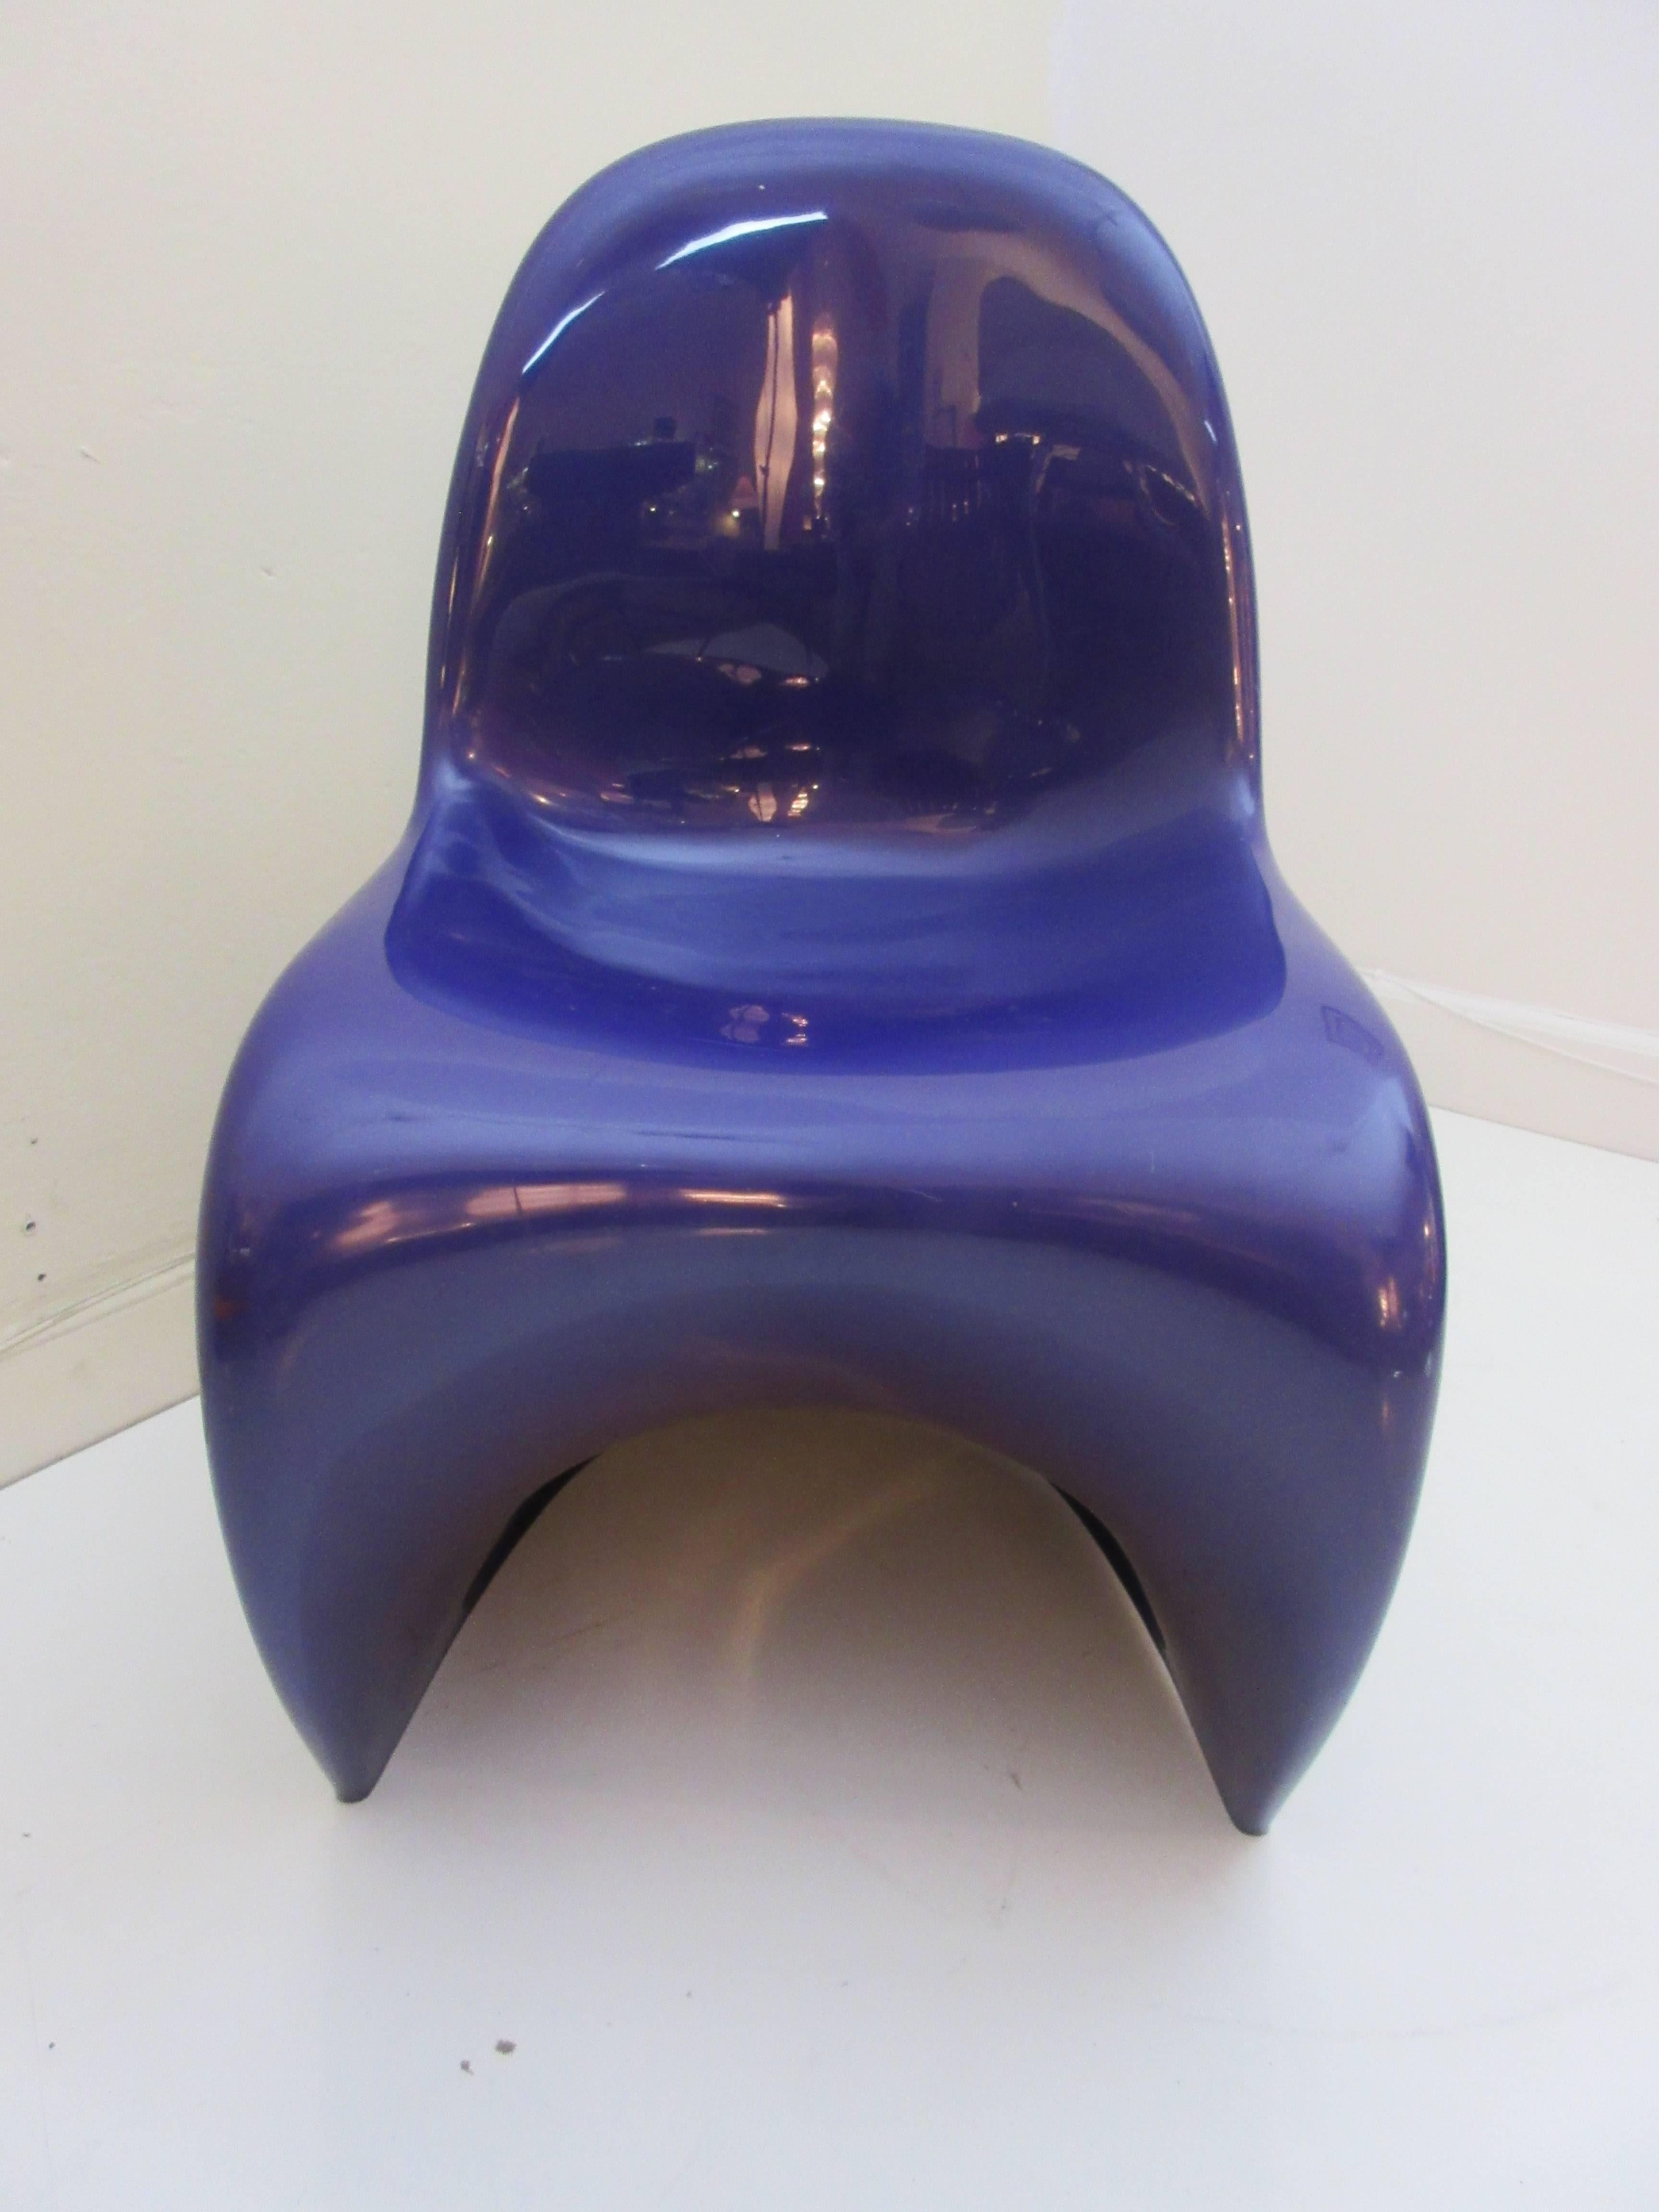 Verner Panton S Chair for Herman Miller a Fehlbaum Produced Chair as embossed in rare purple . The date of production is embossed on the underside in the plastic Nov. 1976. Ingeniously made from one continuous extruded thermoplastic form. Chair is